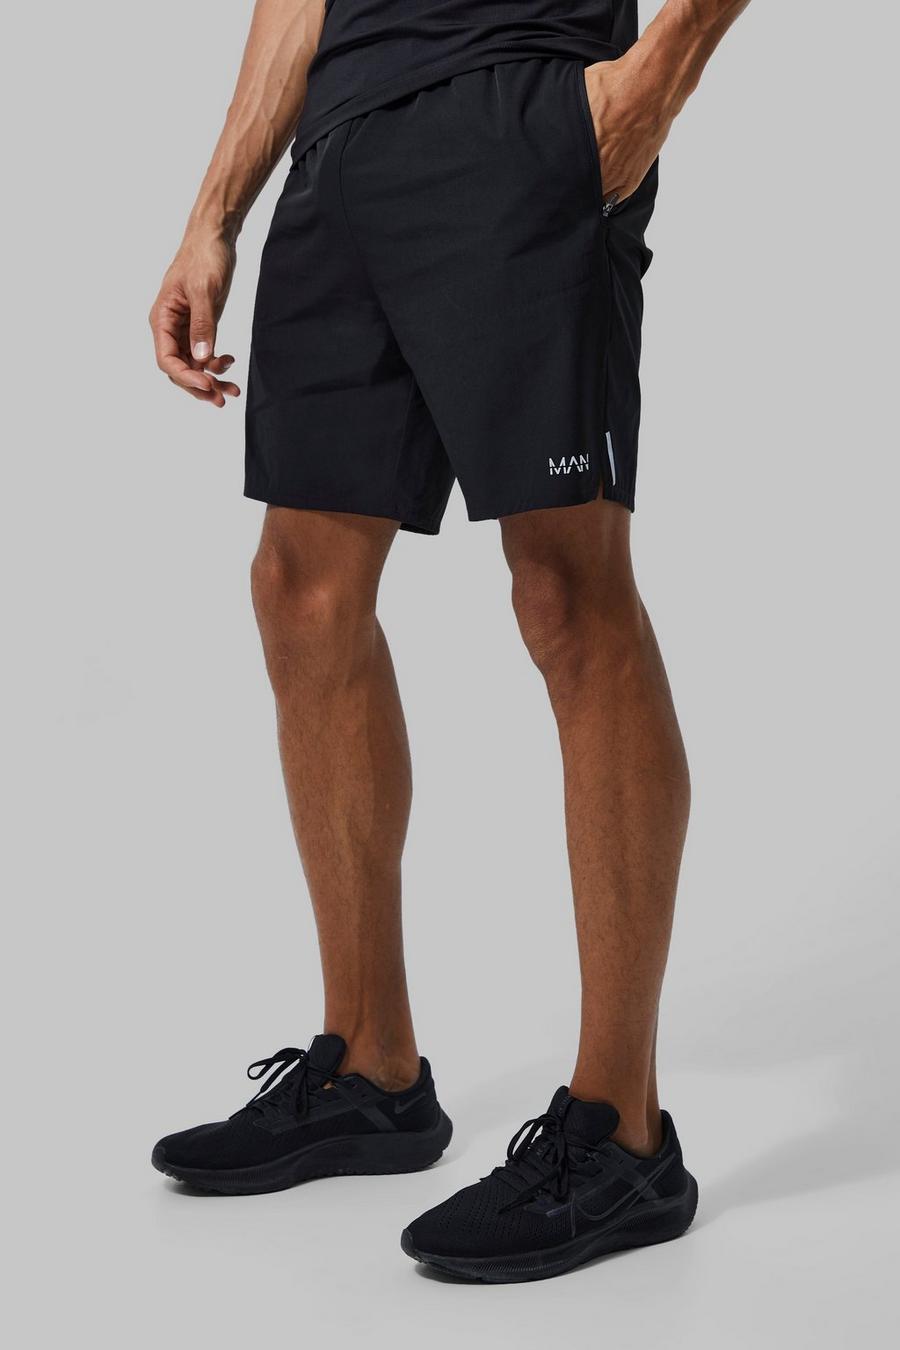 Tall Man Active Lightweight Performance Shorts, Black image number 1